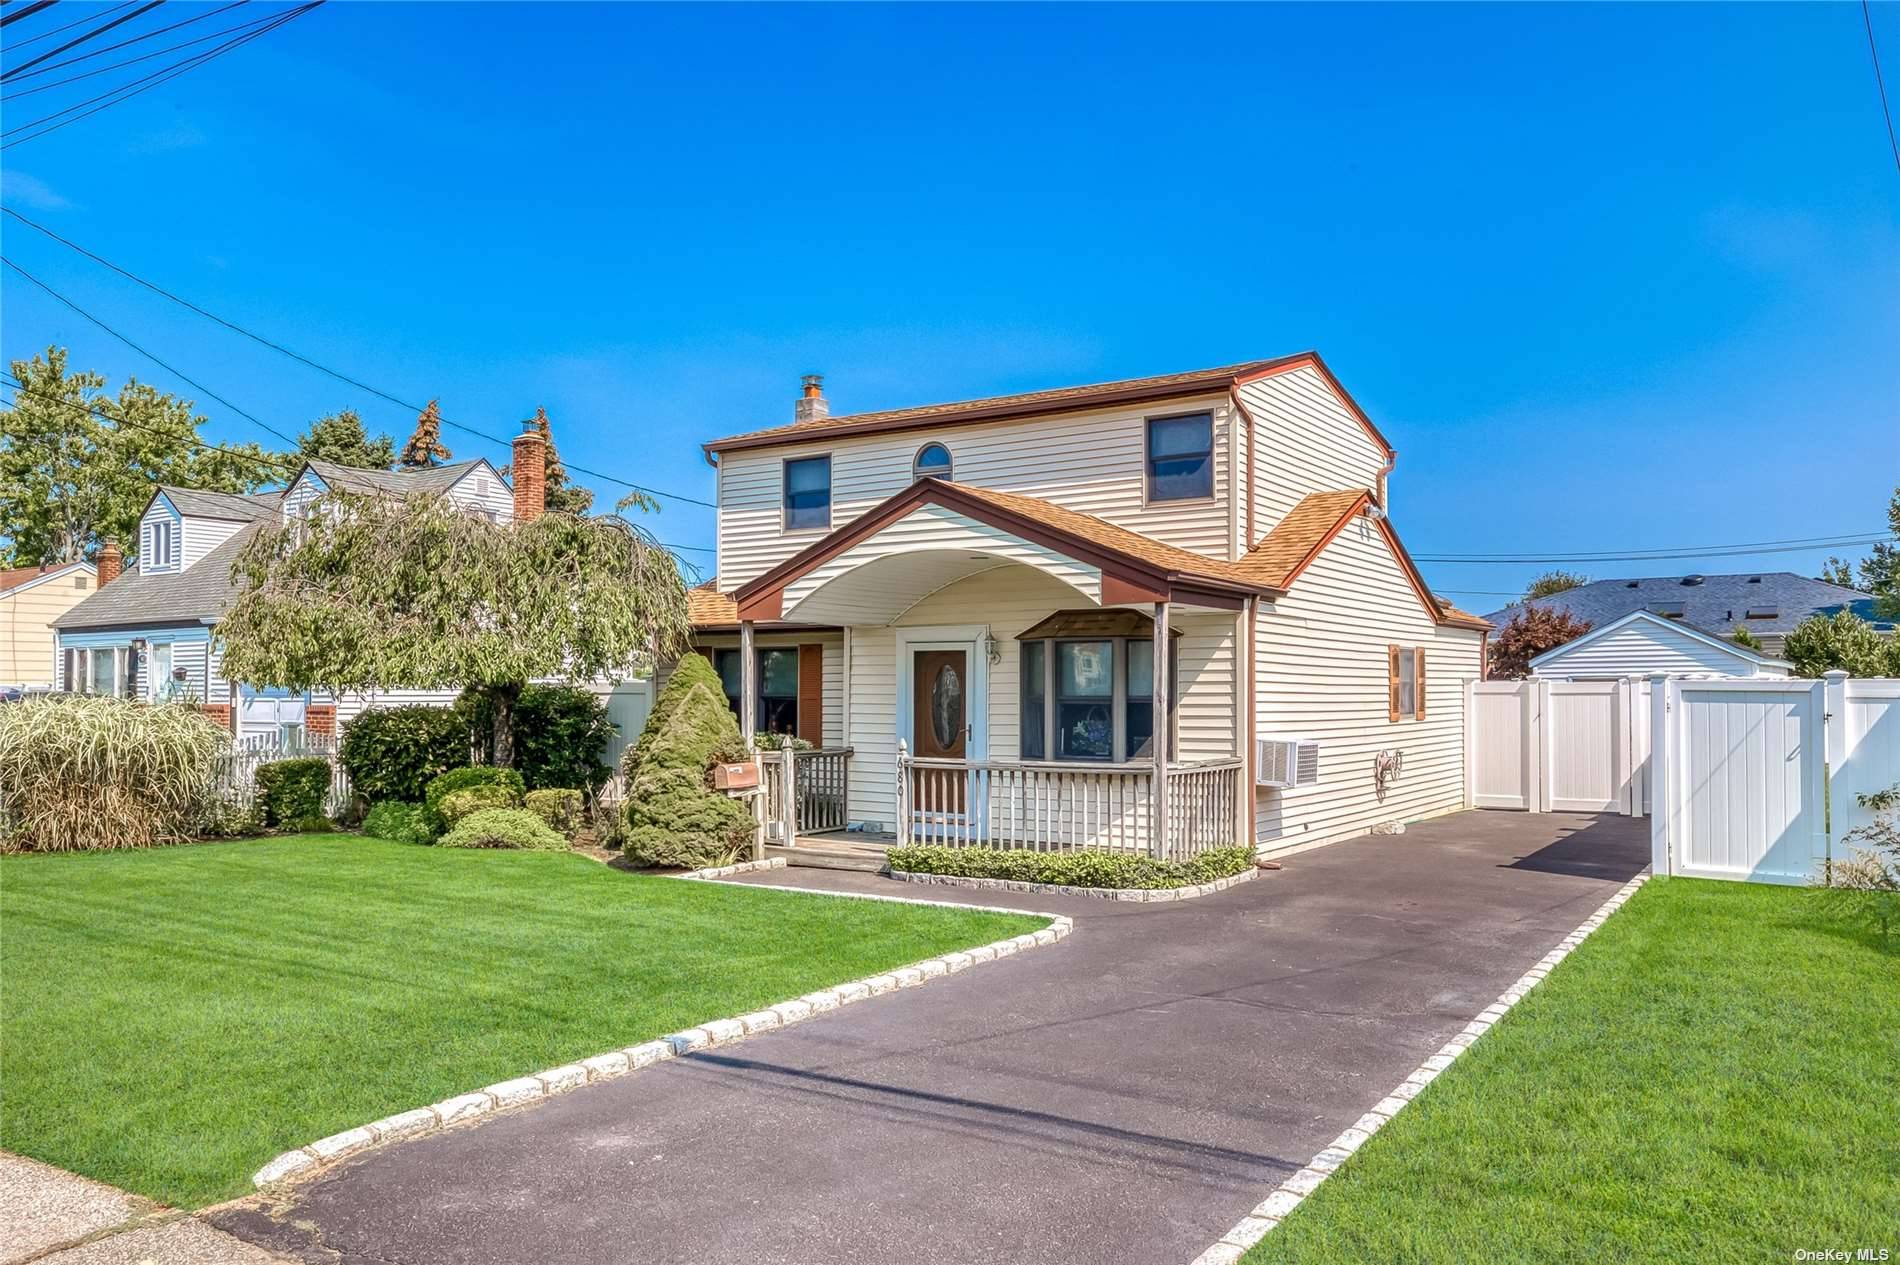 Warm Bright And Airy Expanded Cape Located In The Heart Of Lindenhurst.